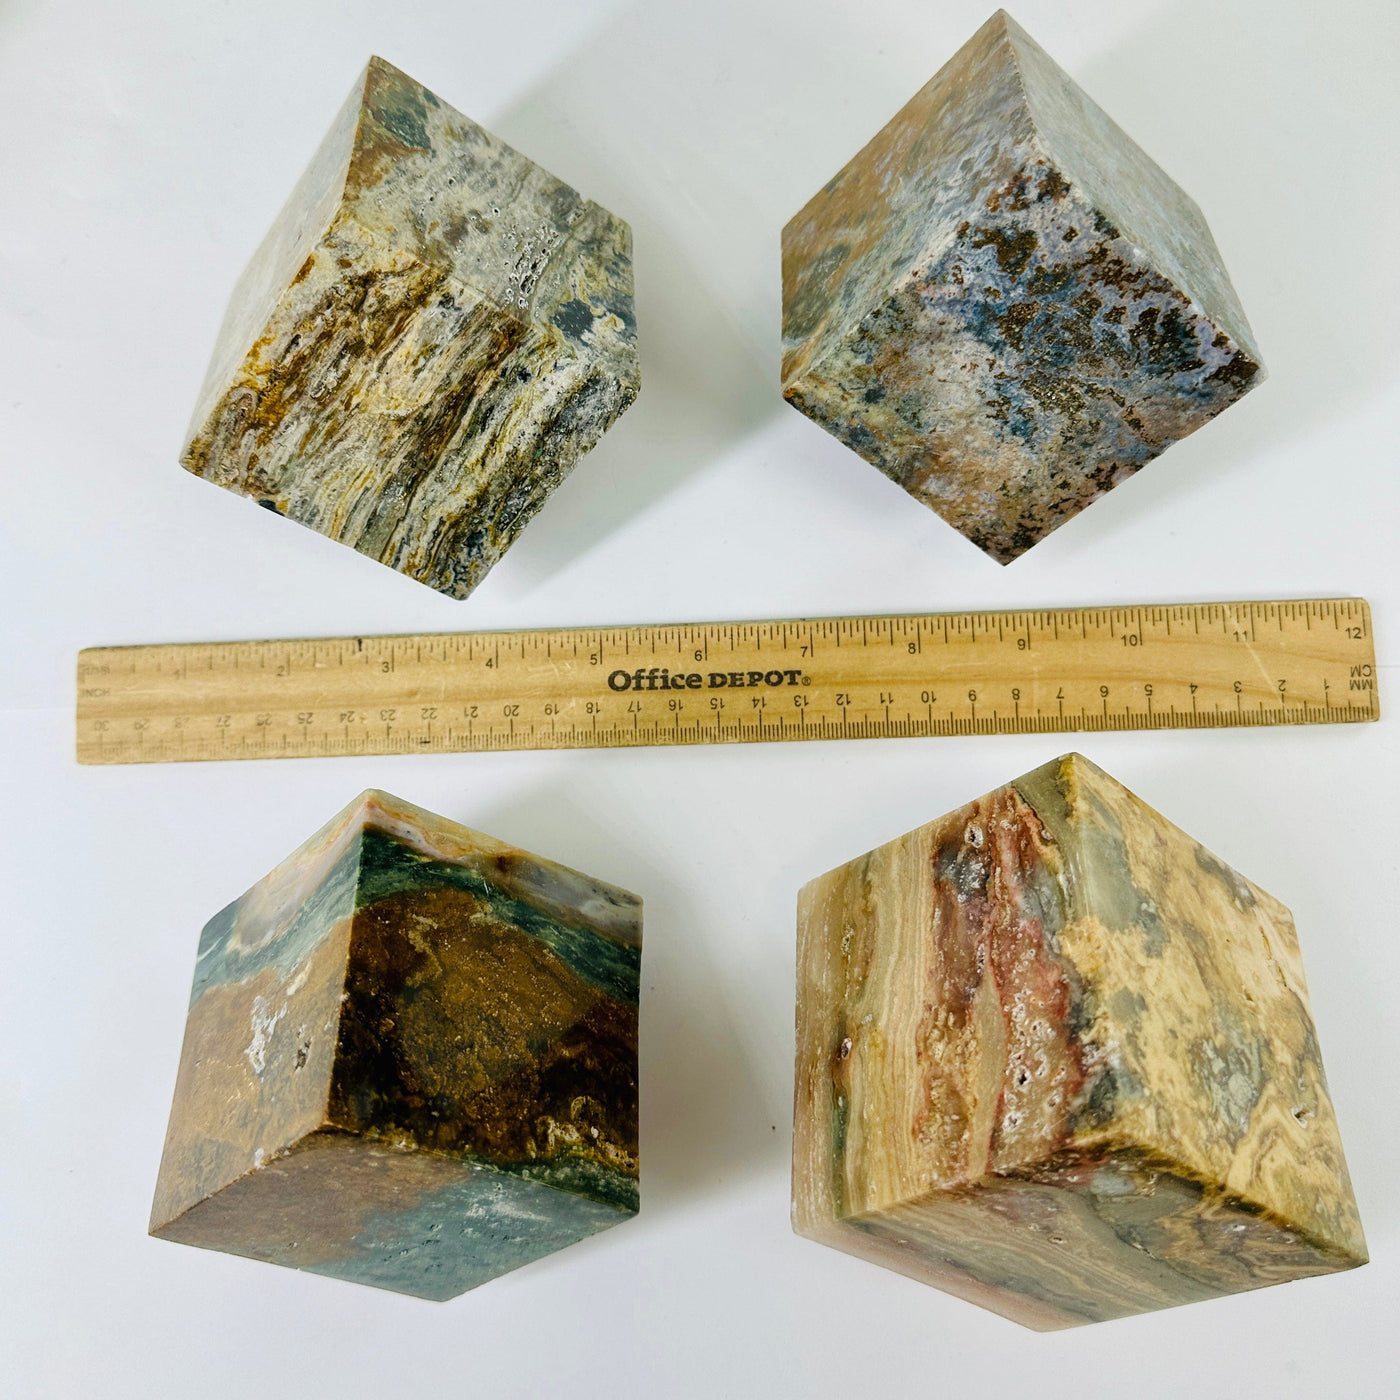 Ocean Jasper Cube - You Choose all four variants with ruler for size reference